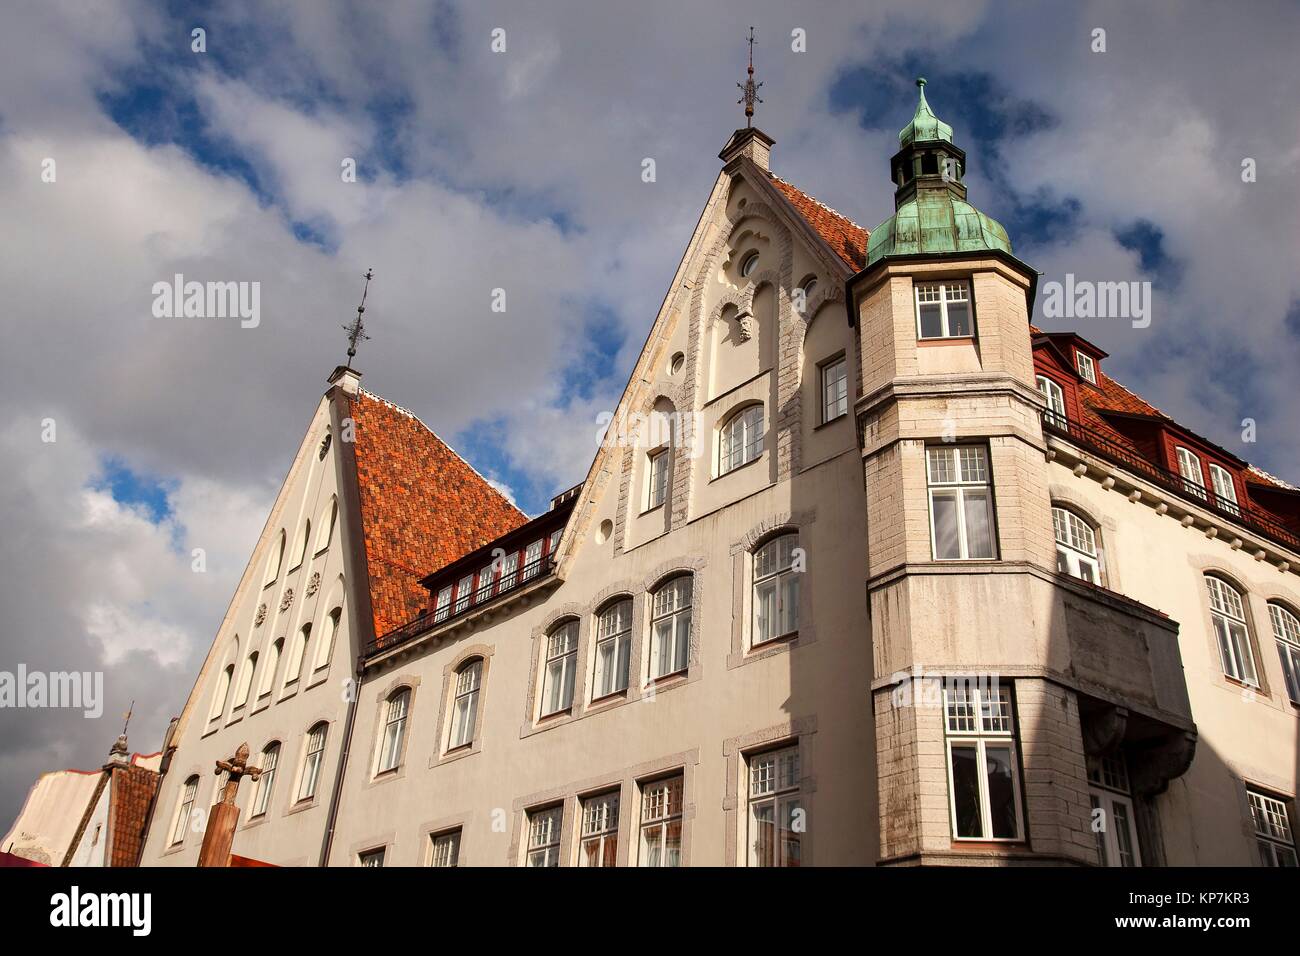 View to the traditional buildings in the old town, Tallinn, Estonia, Baltic States, Europe. Stock Photo